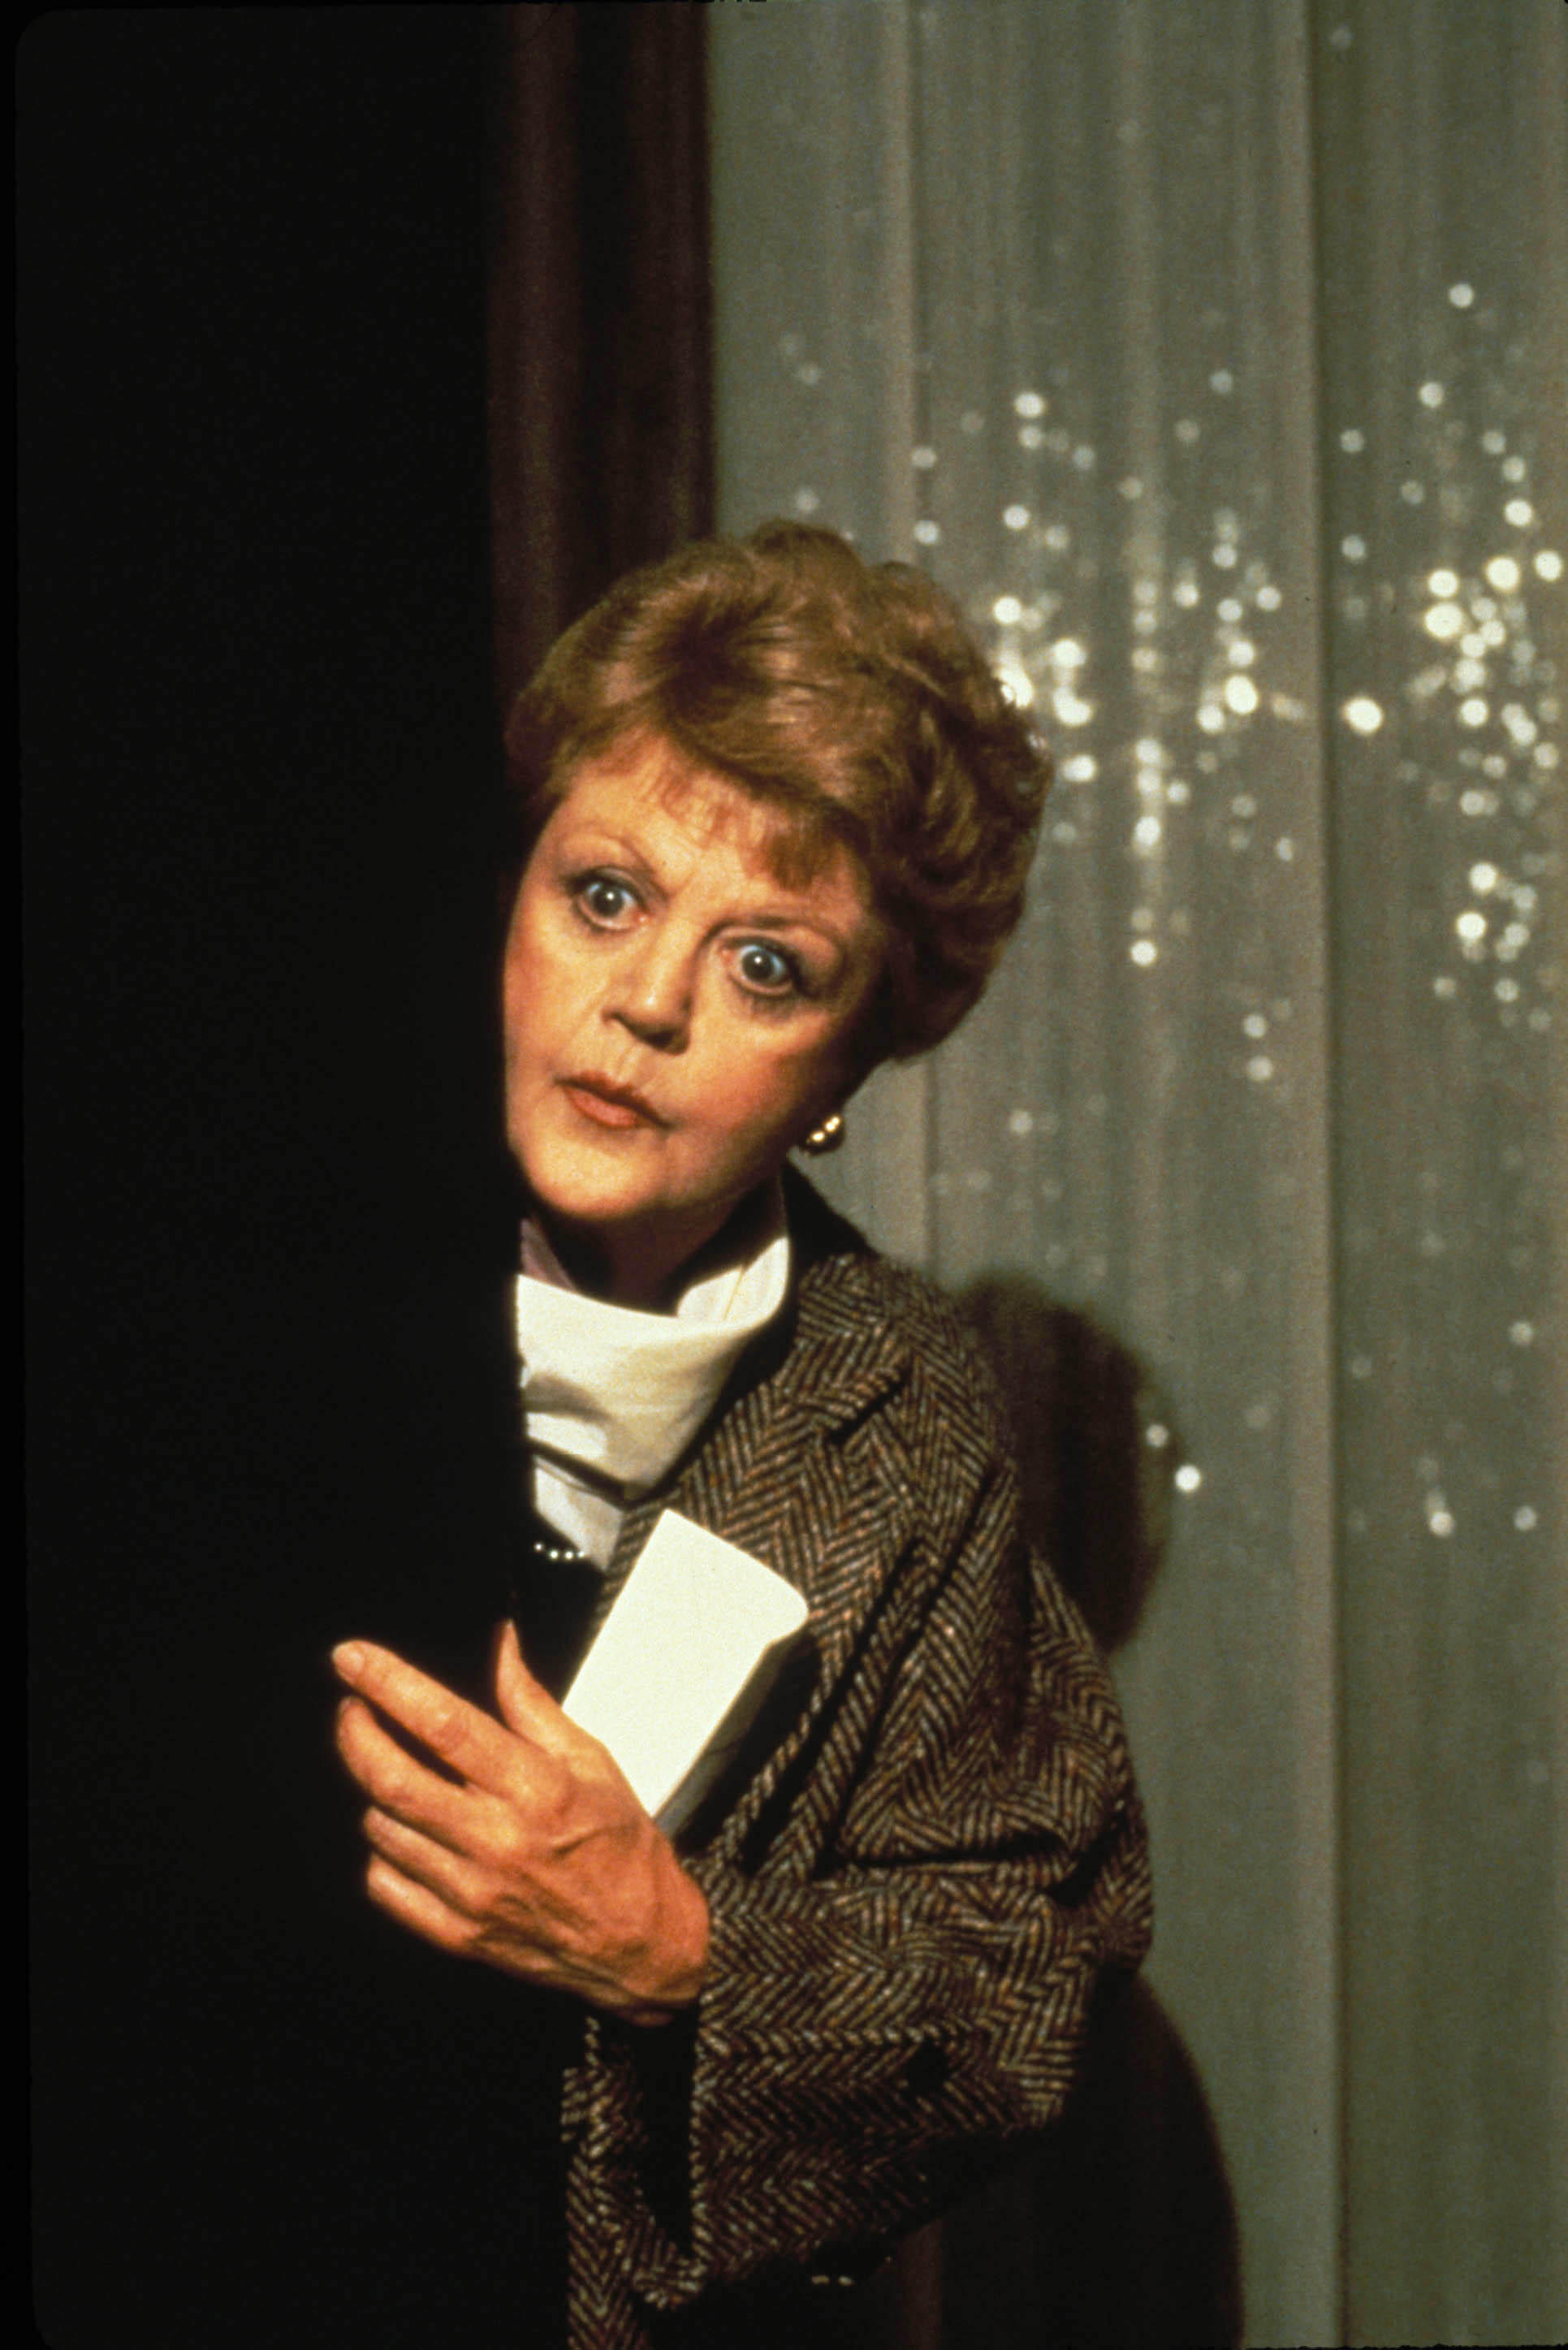 Murder She Wrote is the perfect show to unwind to.